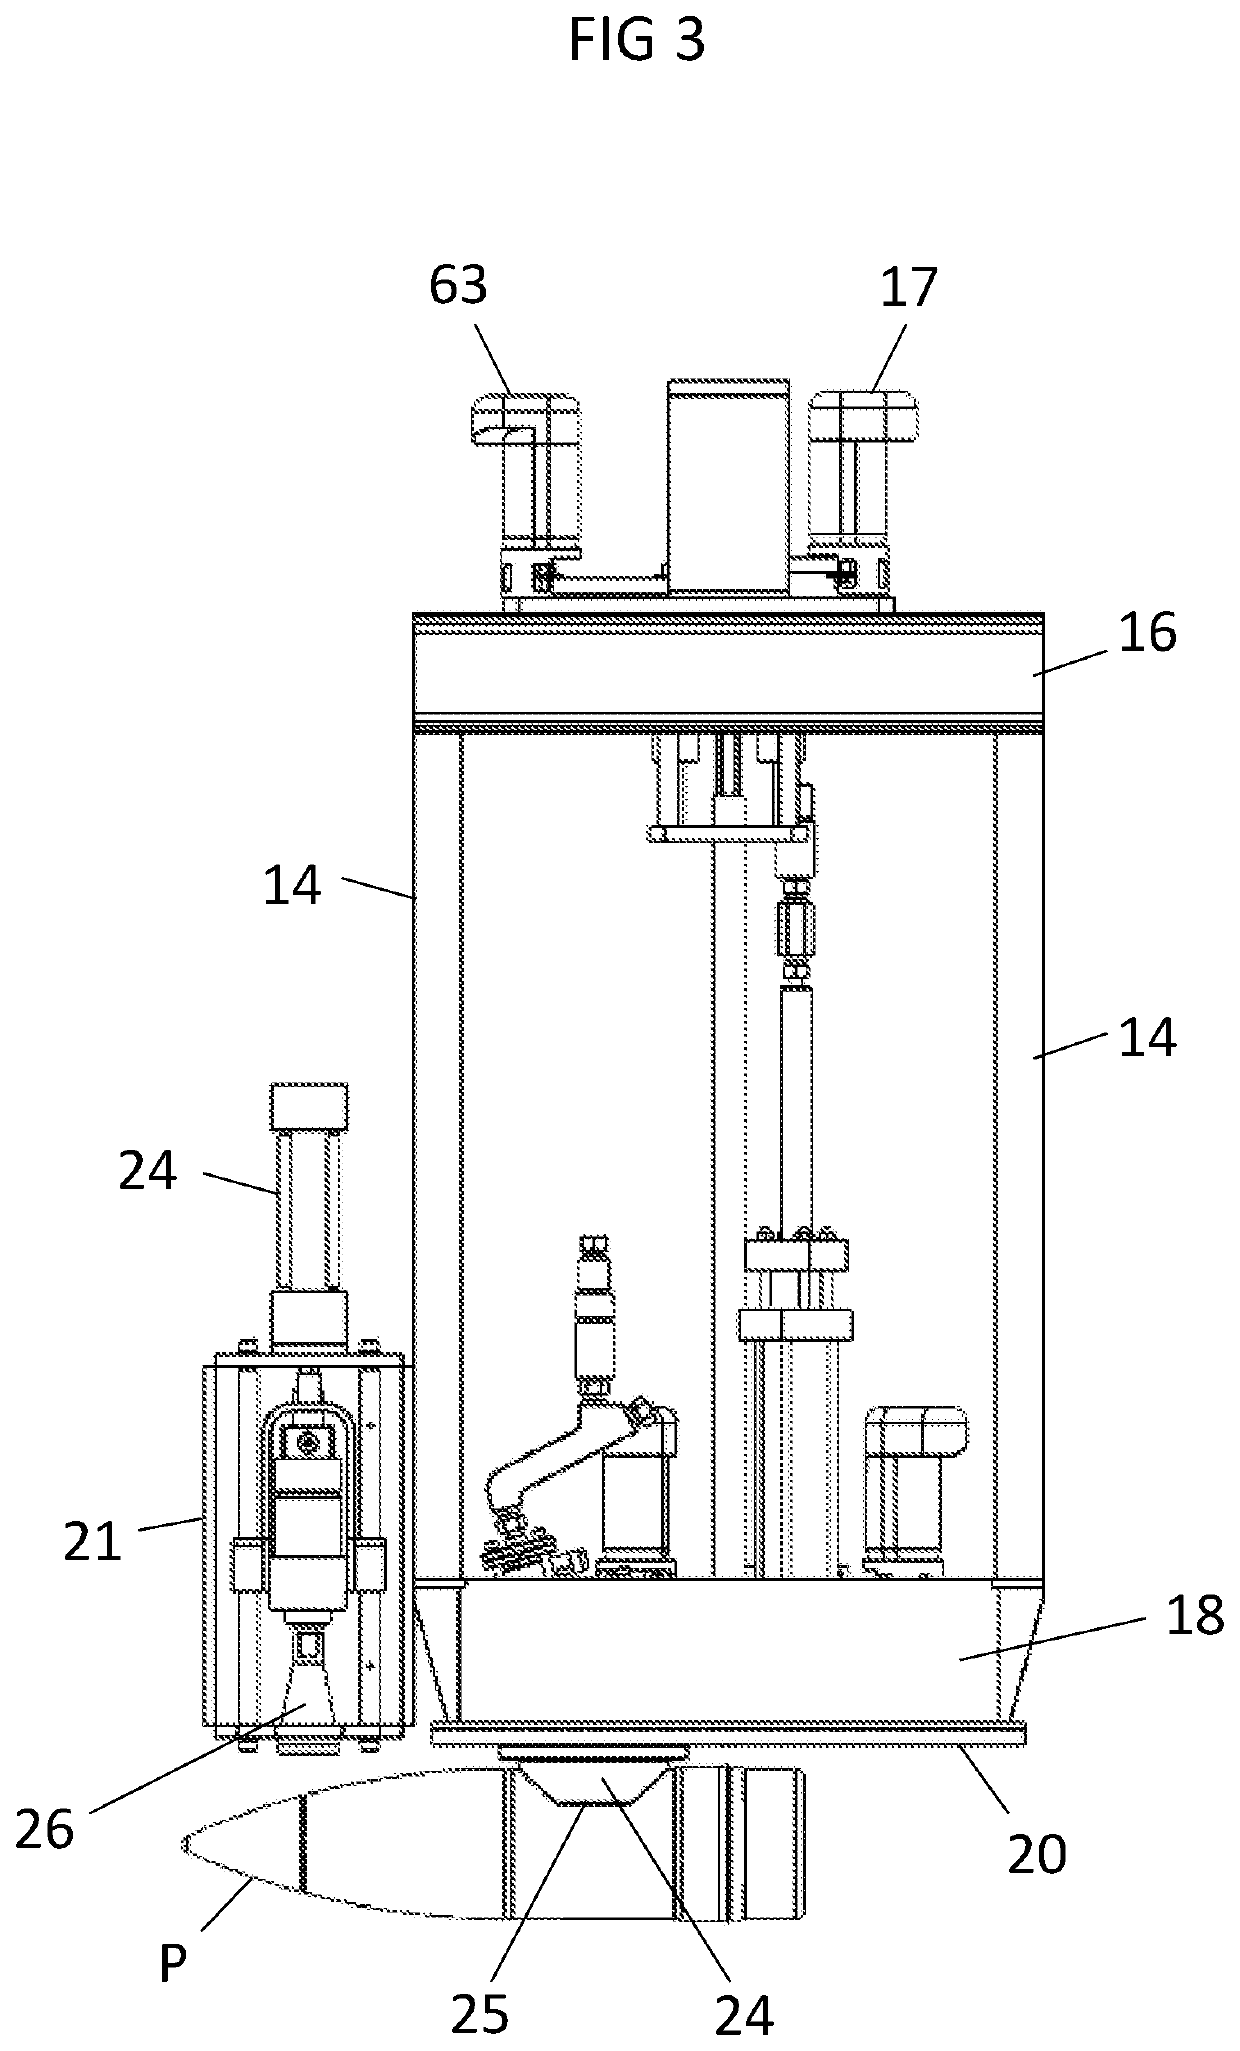 Apparatus For Use in Rendering Safe Unexploded Ordnance